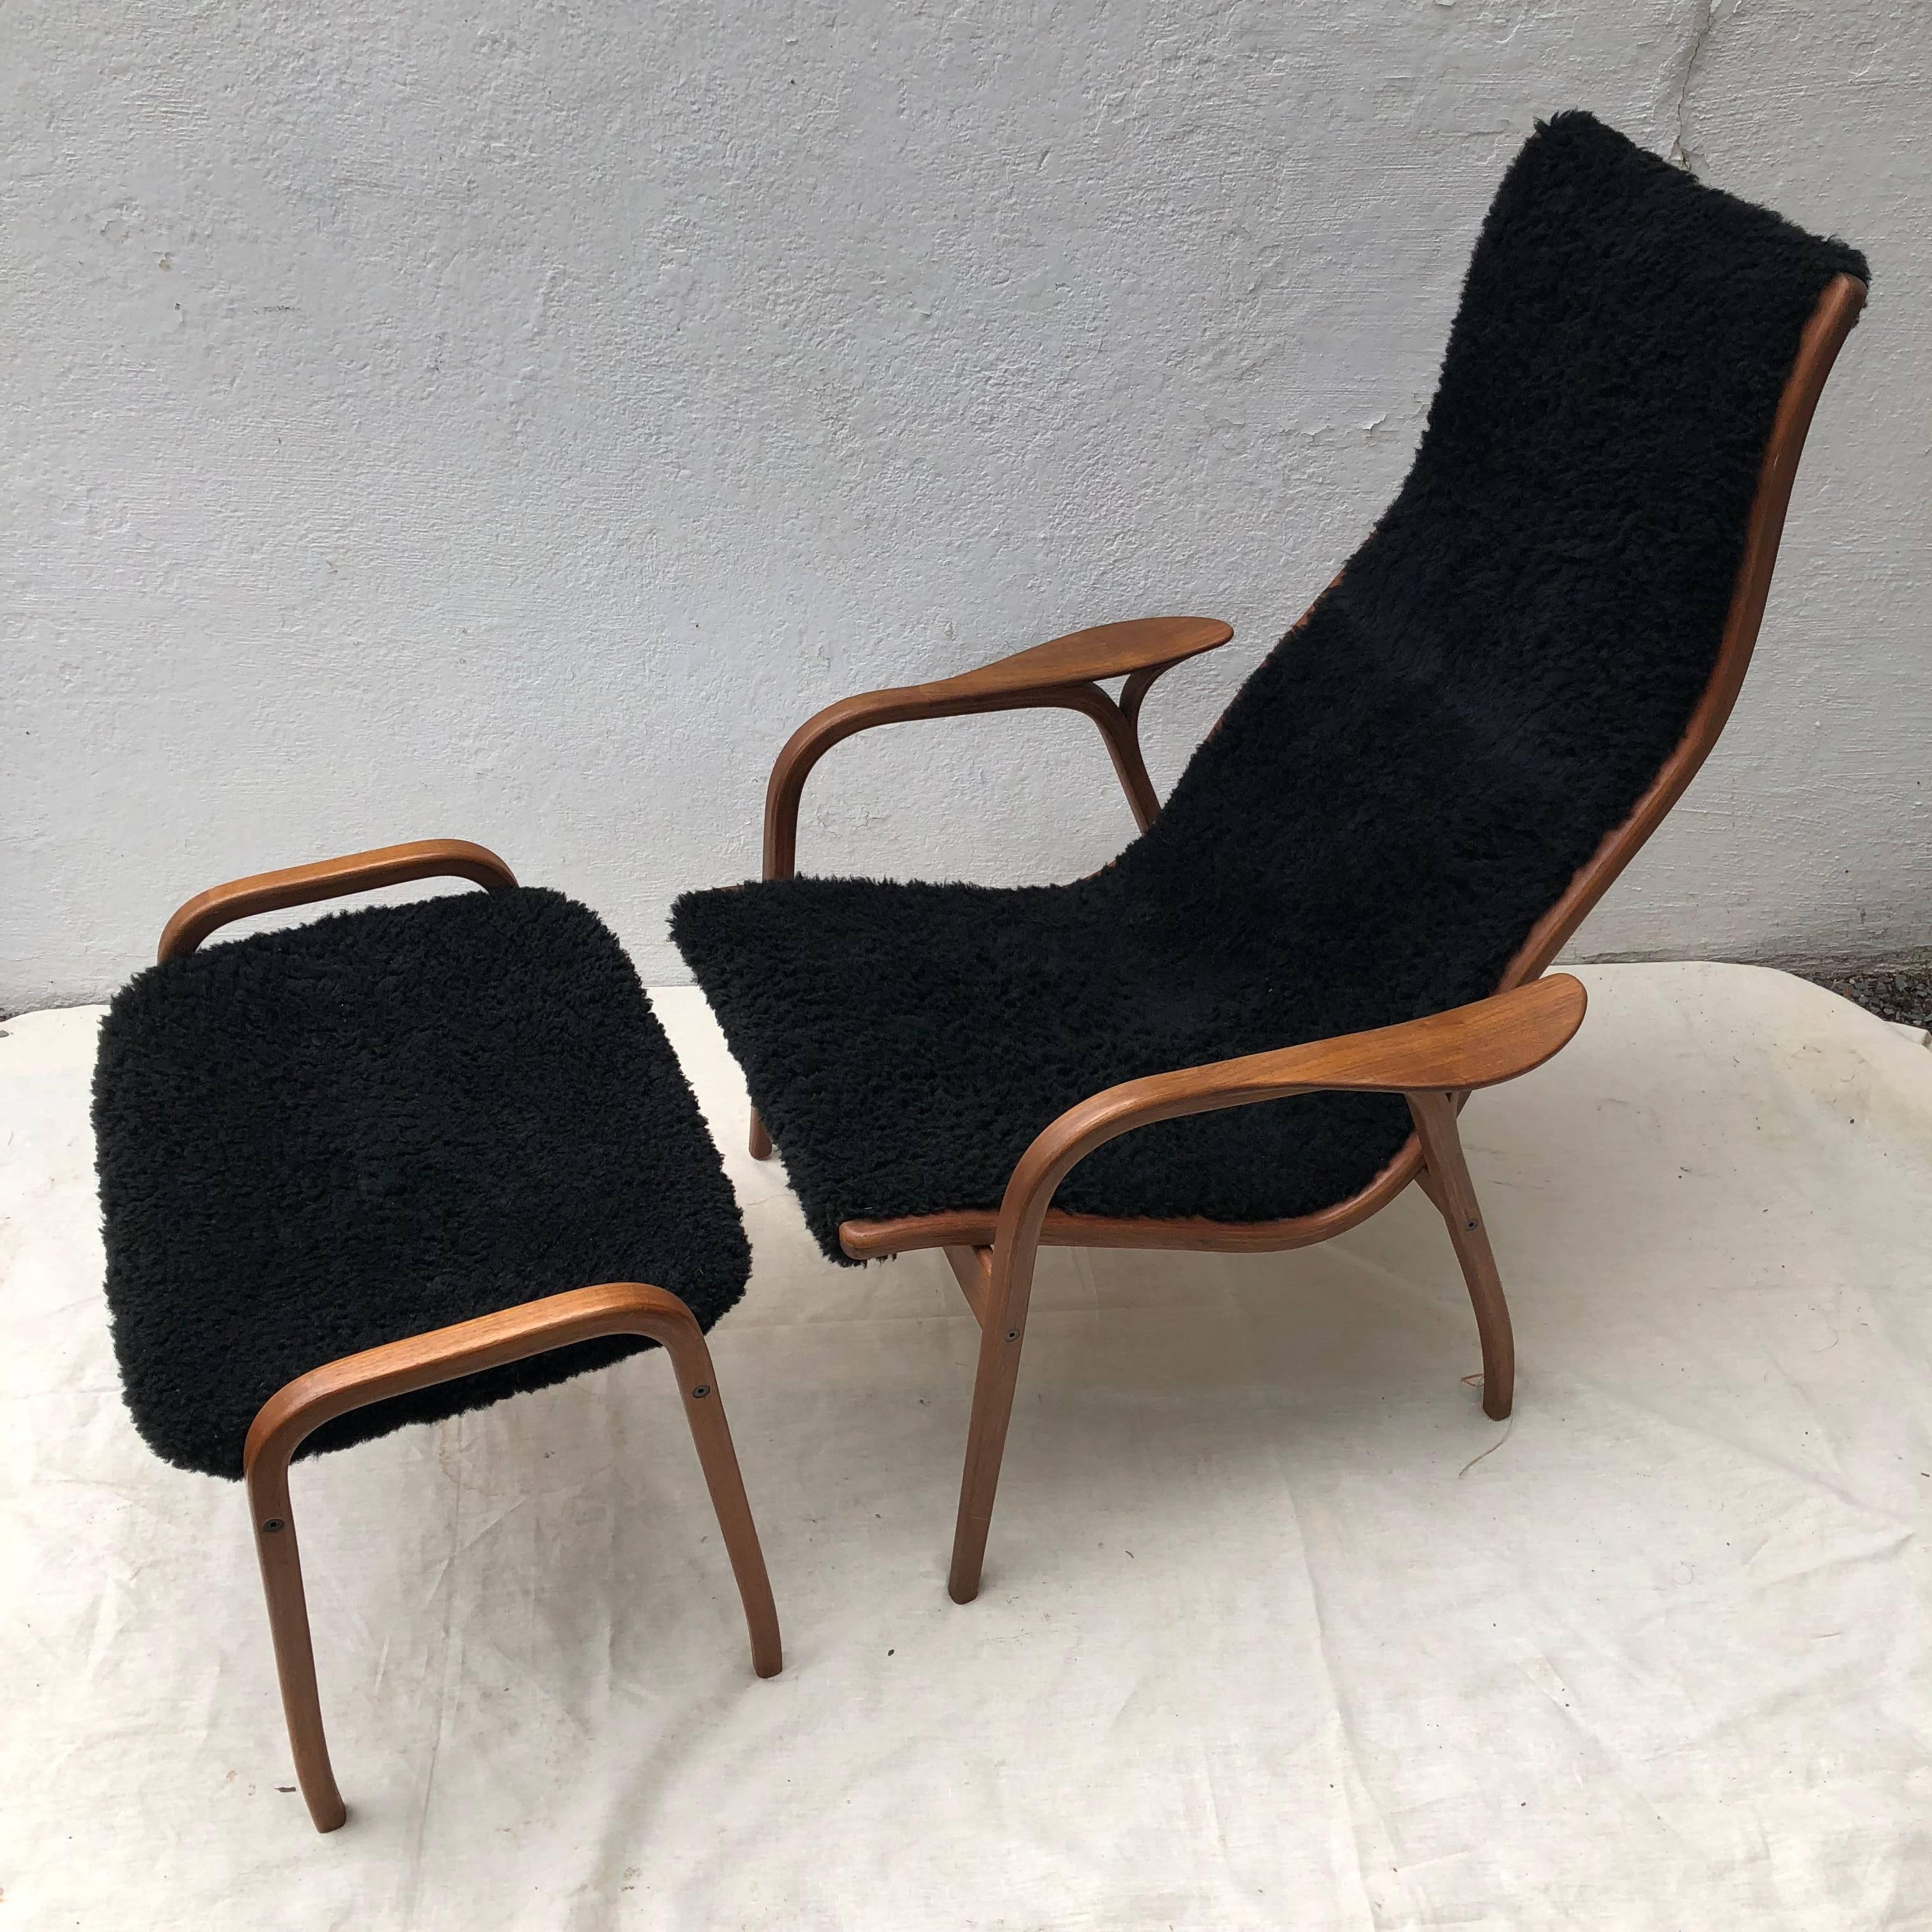 Lamino chair designed by Yngve Ekström for Swedese. Original upholstery, in fair condition.

Measures: Chair 27.25